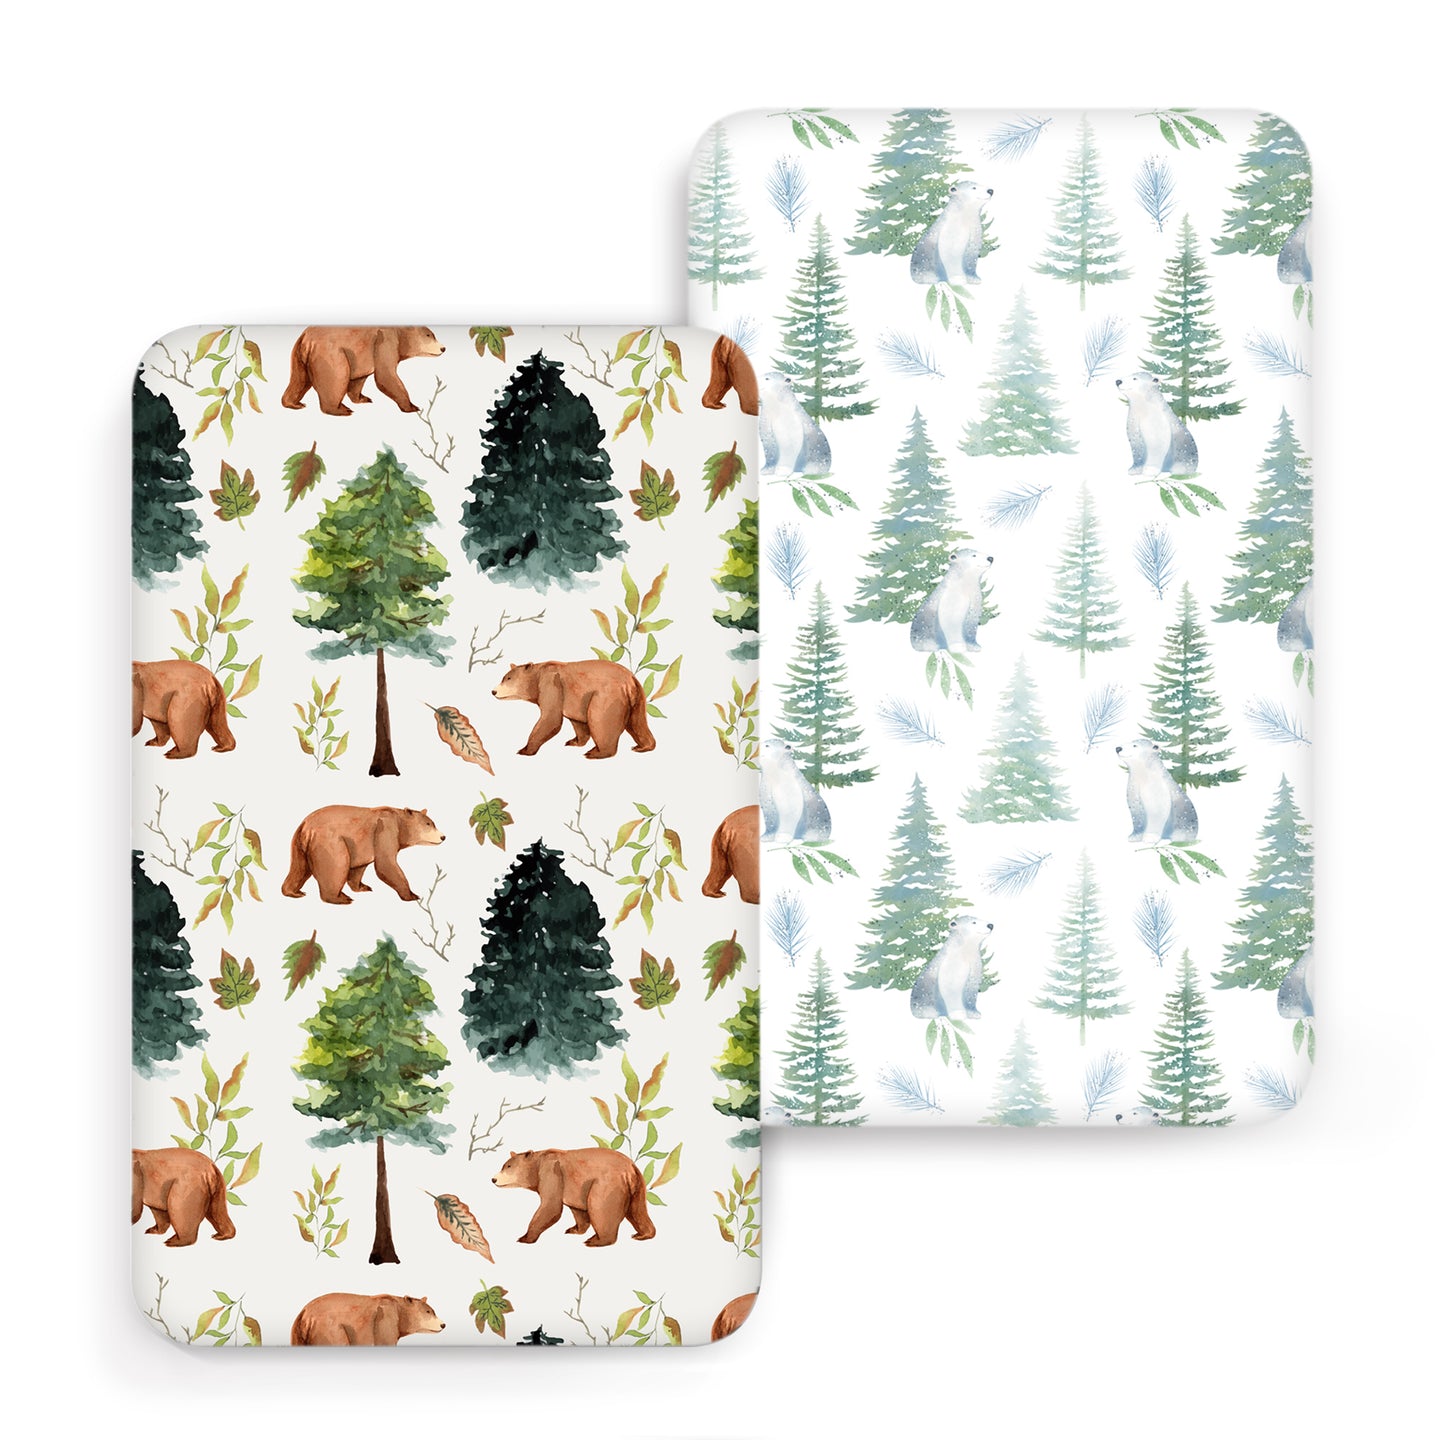 Acrabros Snug Fitted Crib Sheet Set Bears & Forest